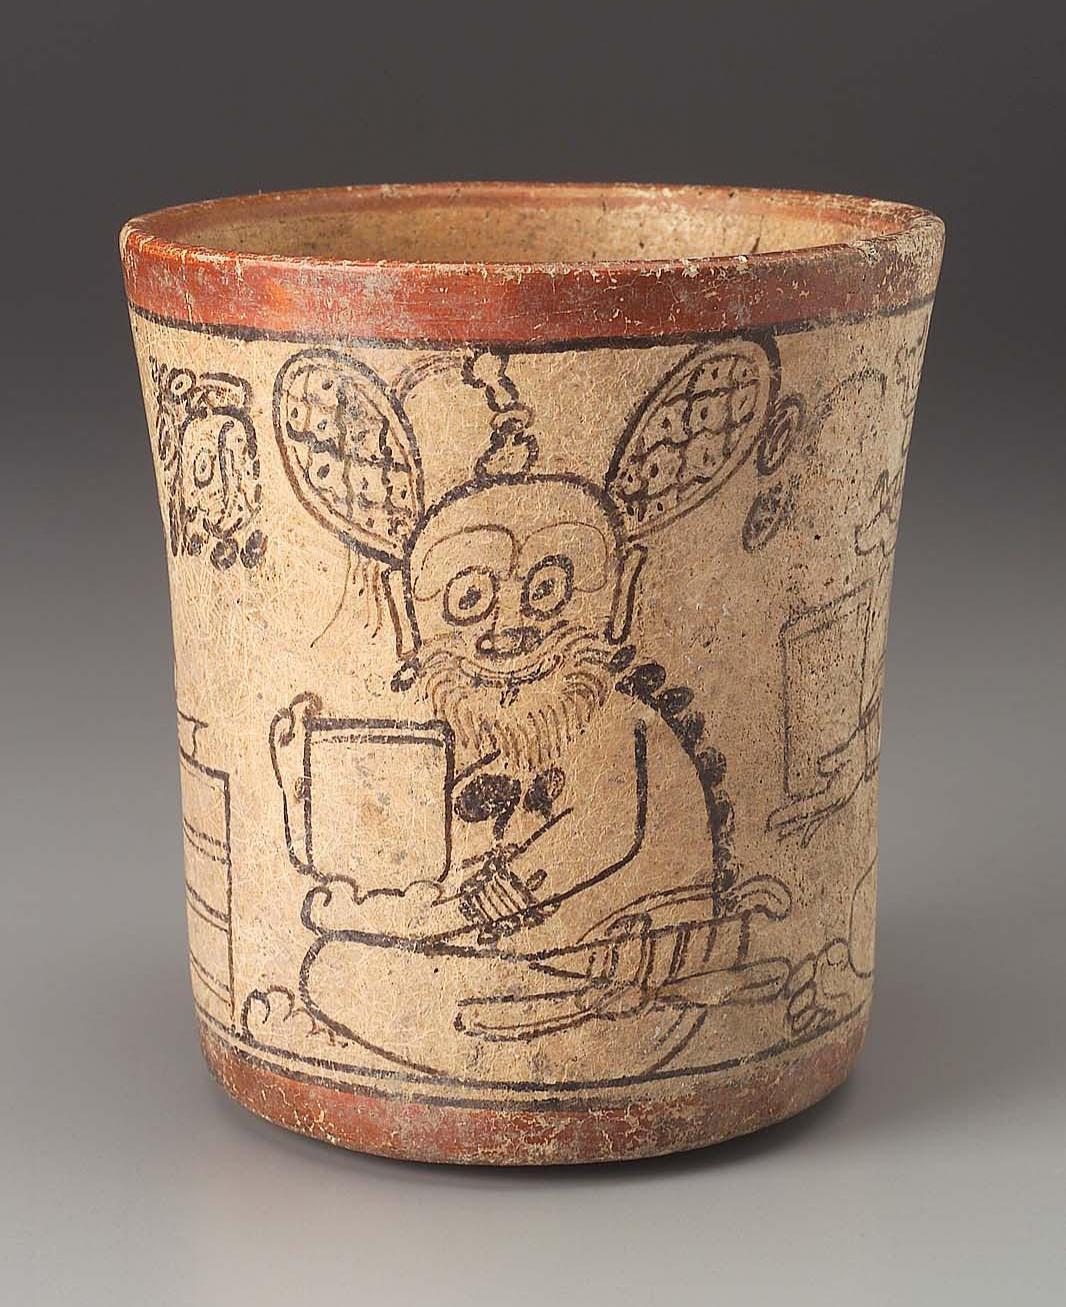 A Maya cylinder vase from Guatemala. Late Classic Period, 680–780 CE, now housed at the Museum of Fine Arts in Boston.jpg